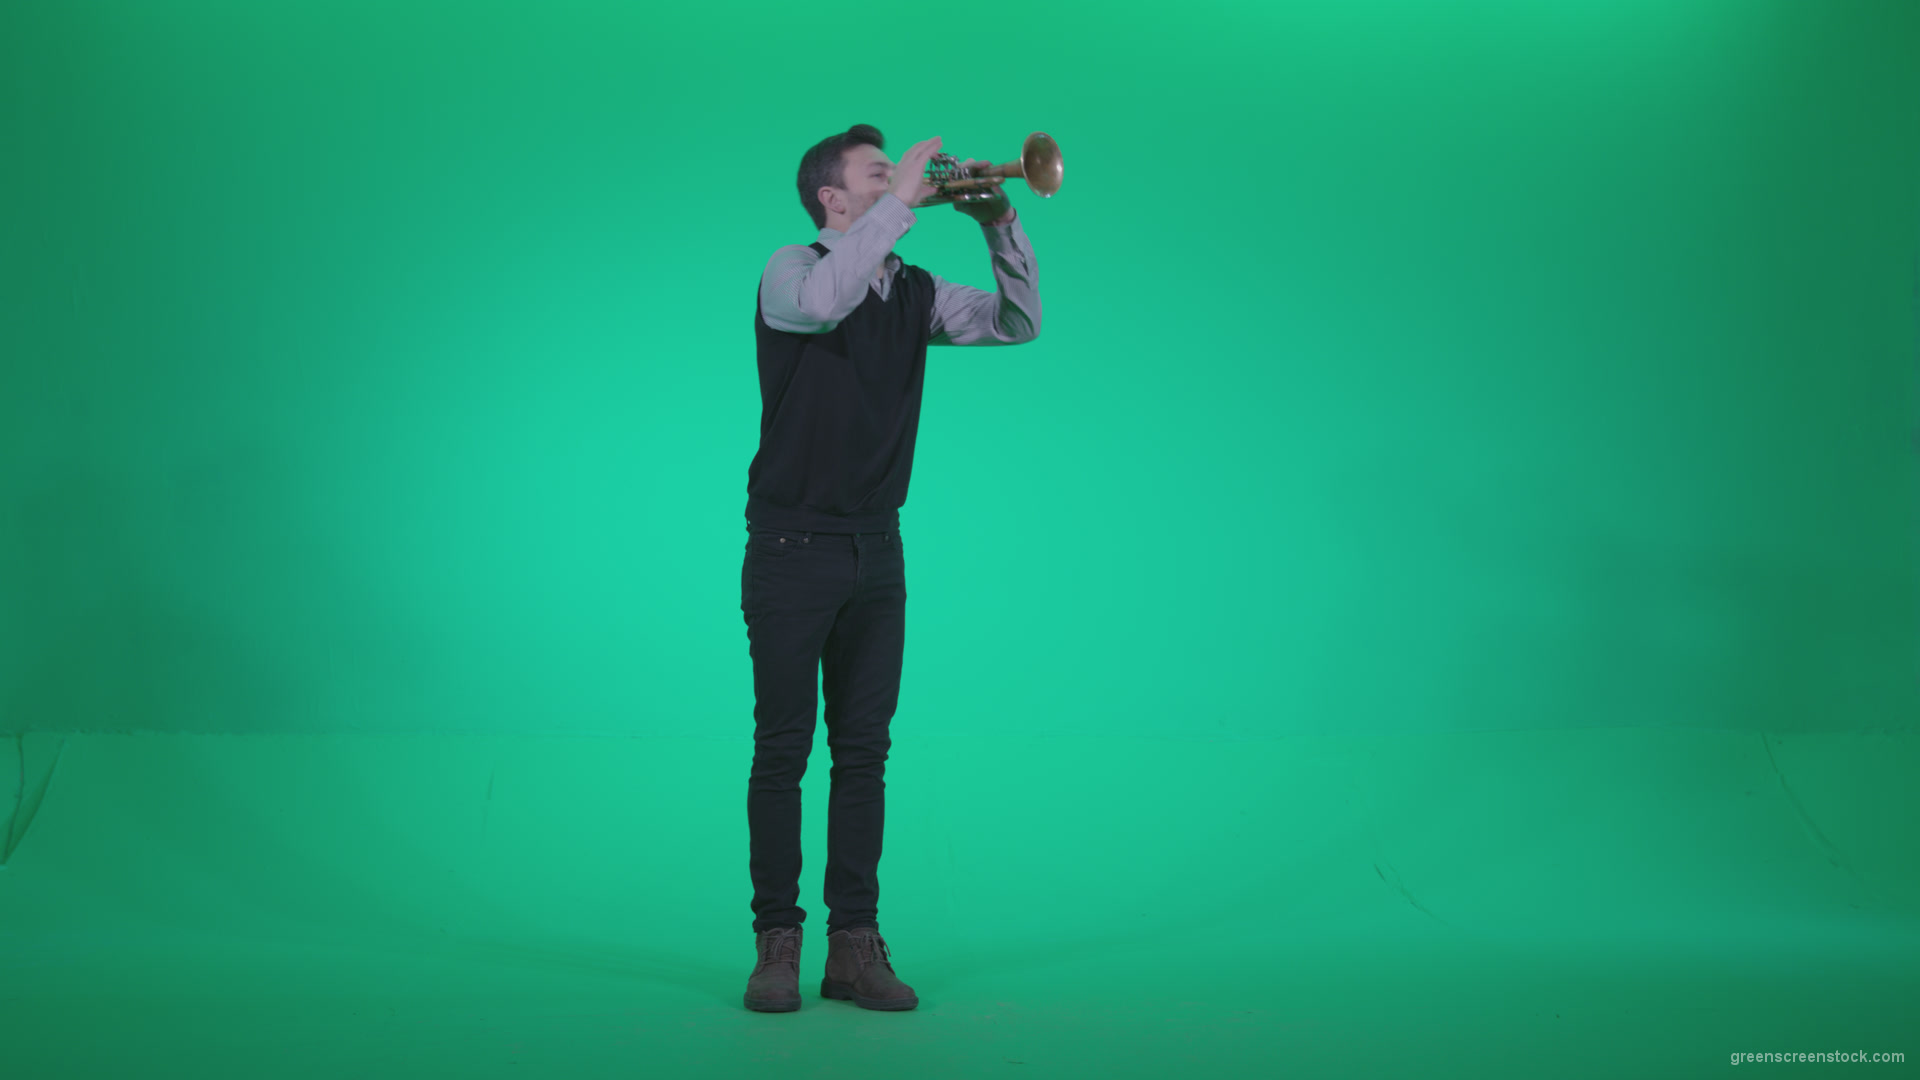 Gold-Trumpet-playing-2_001 Green Screen Stock